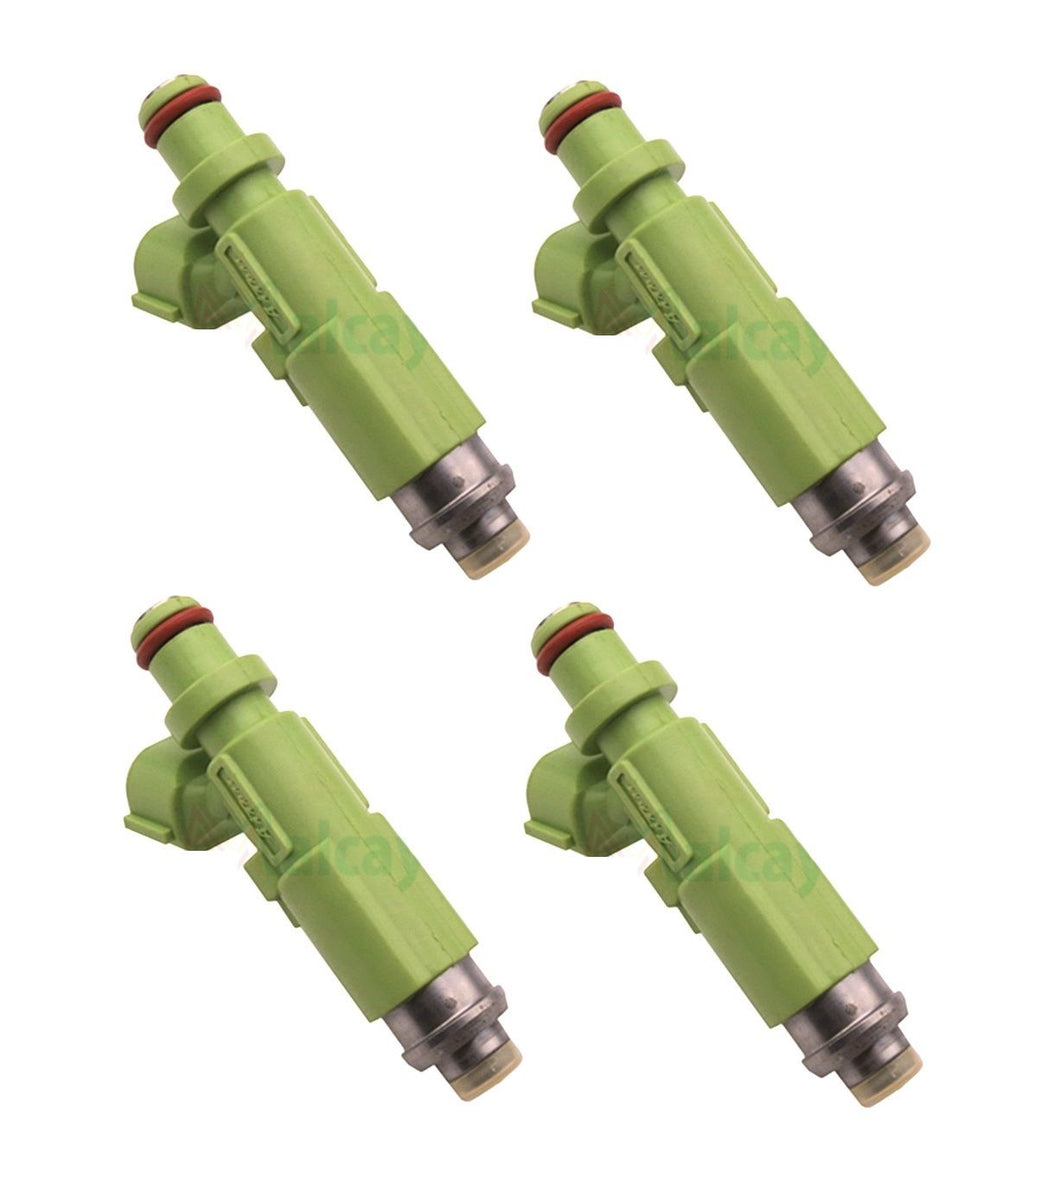 4 x 550cc Fuel Injectors for Toyota 4AGE / 4AGZE TOP FEED TYPE E85